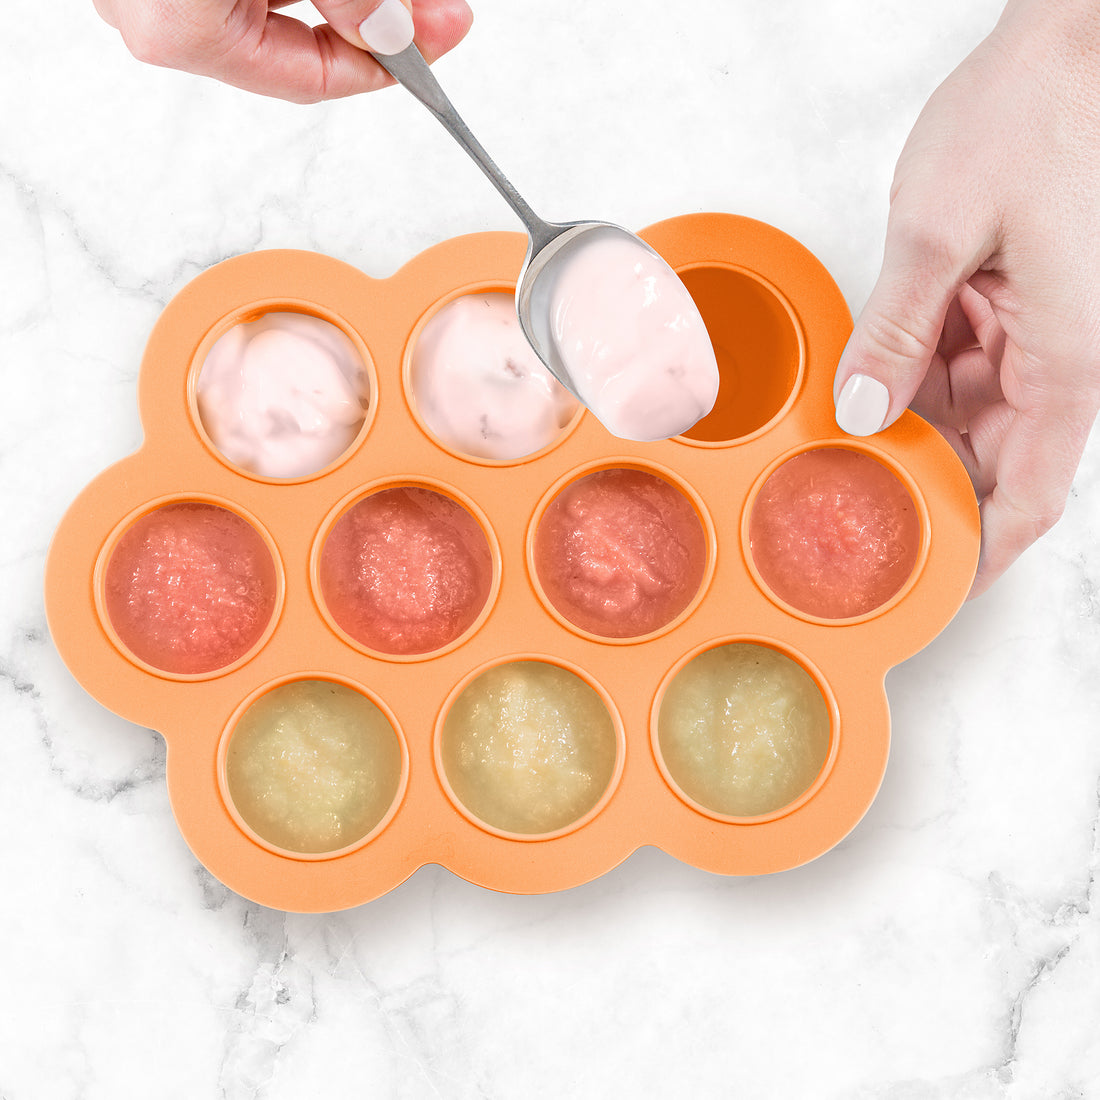 Top 5 Best Ice Cube Tray for Baby Food, 2021 Reviews